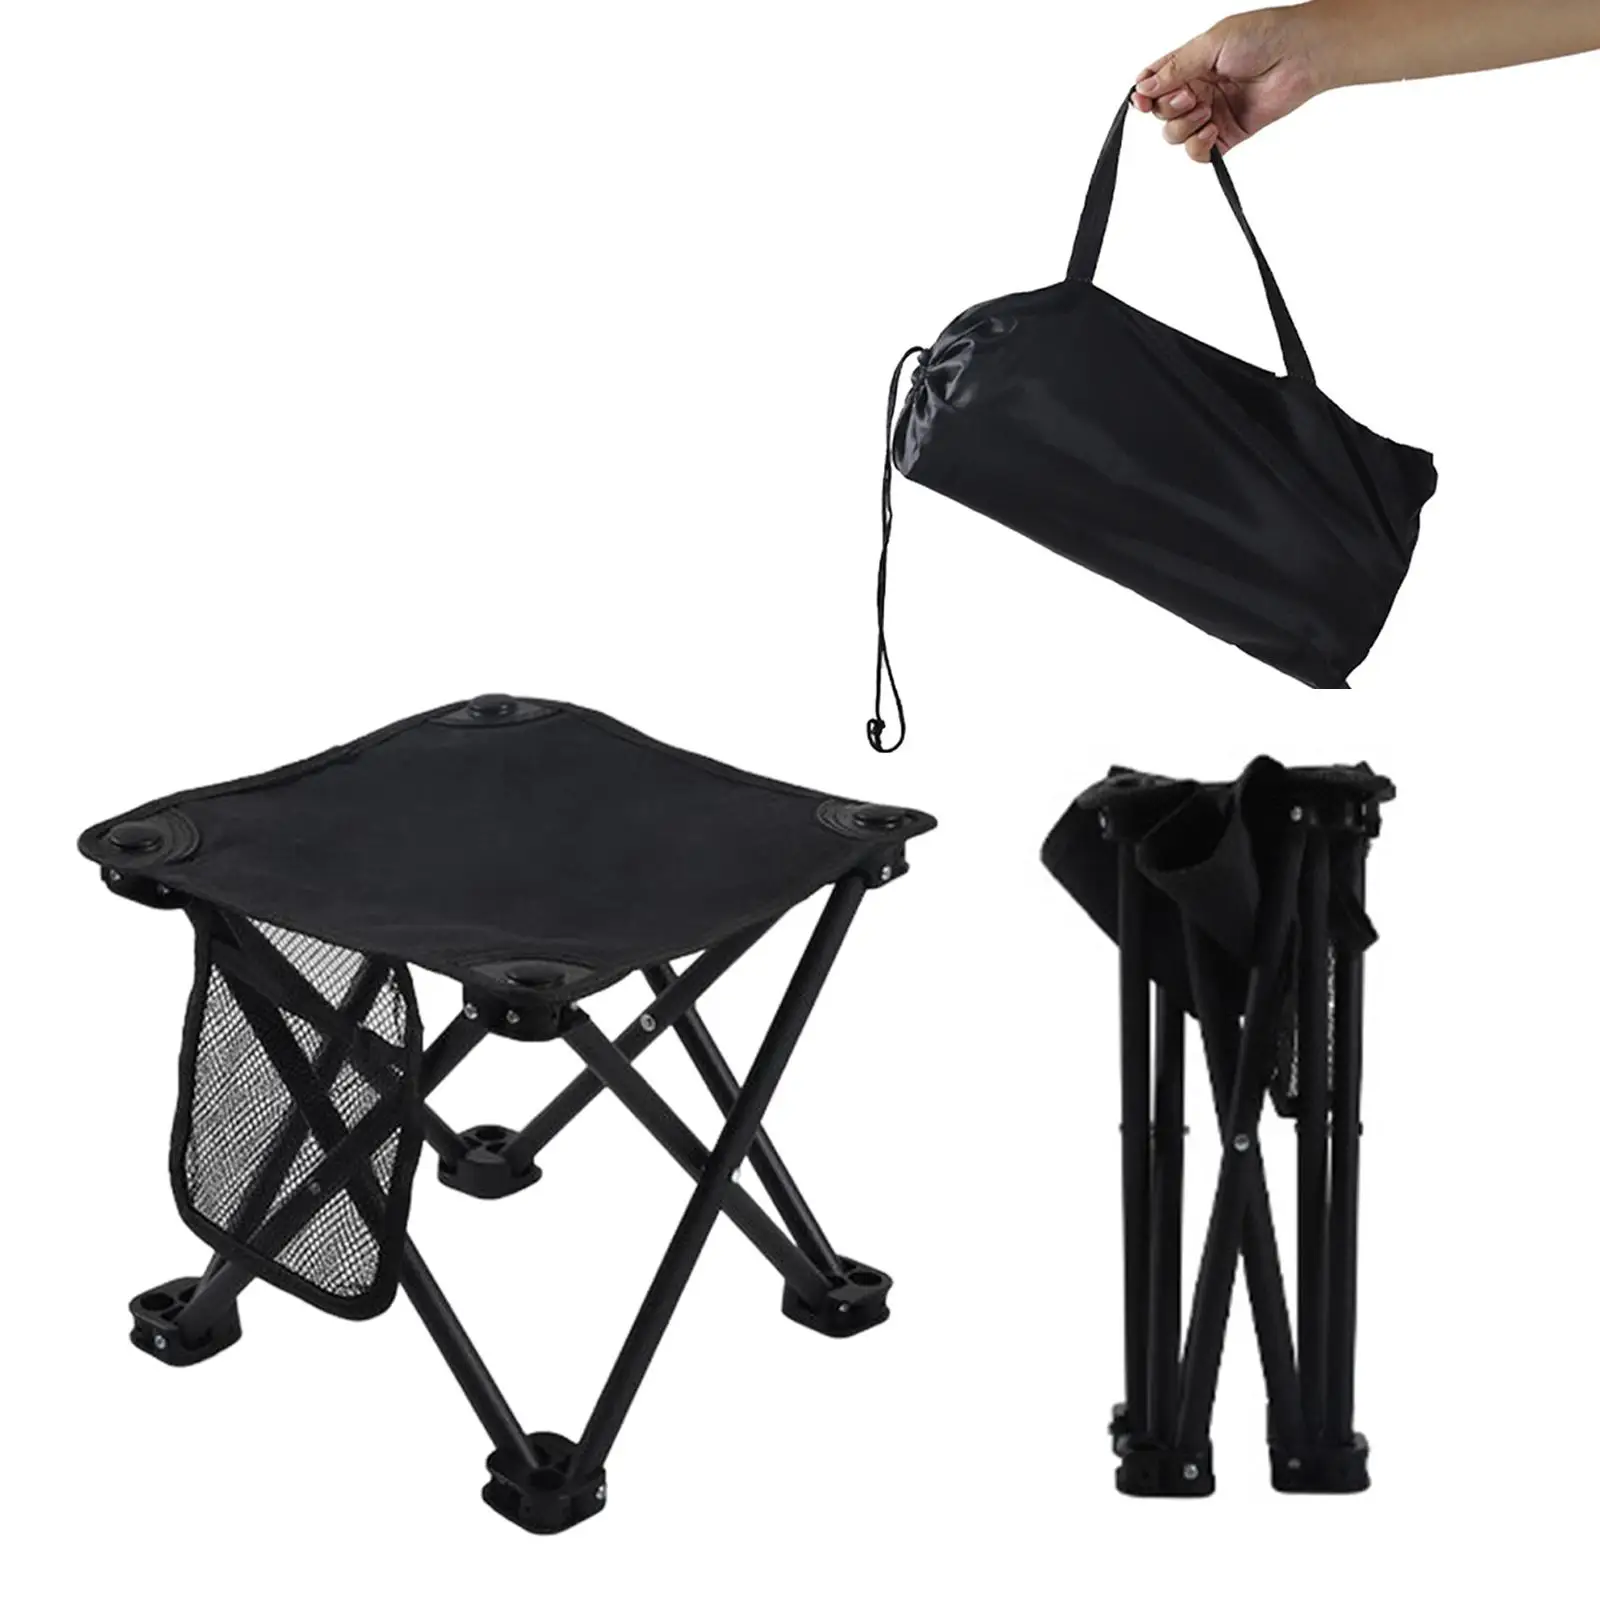 Camping Stool Foldable Retractable Foot Stool Ultralight Folding Chair for Beach Camping